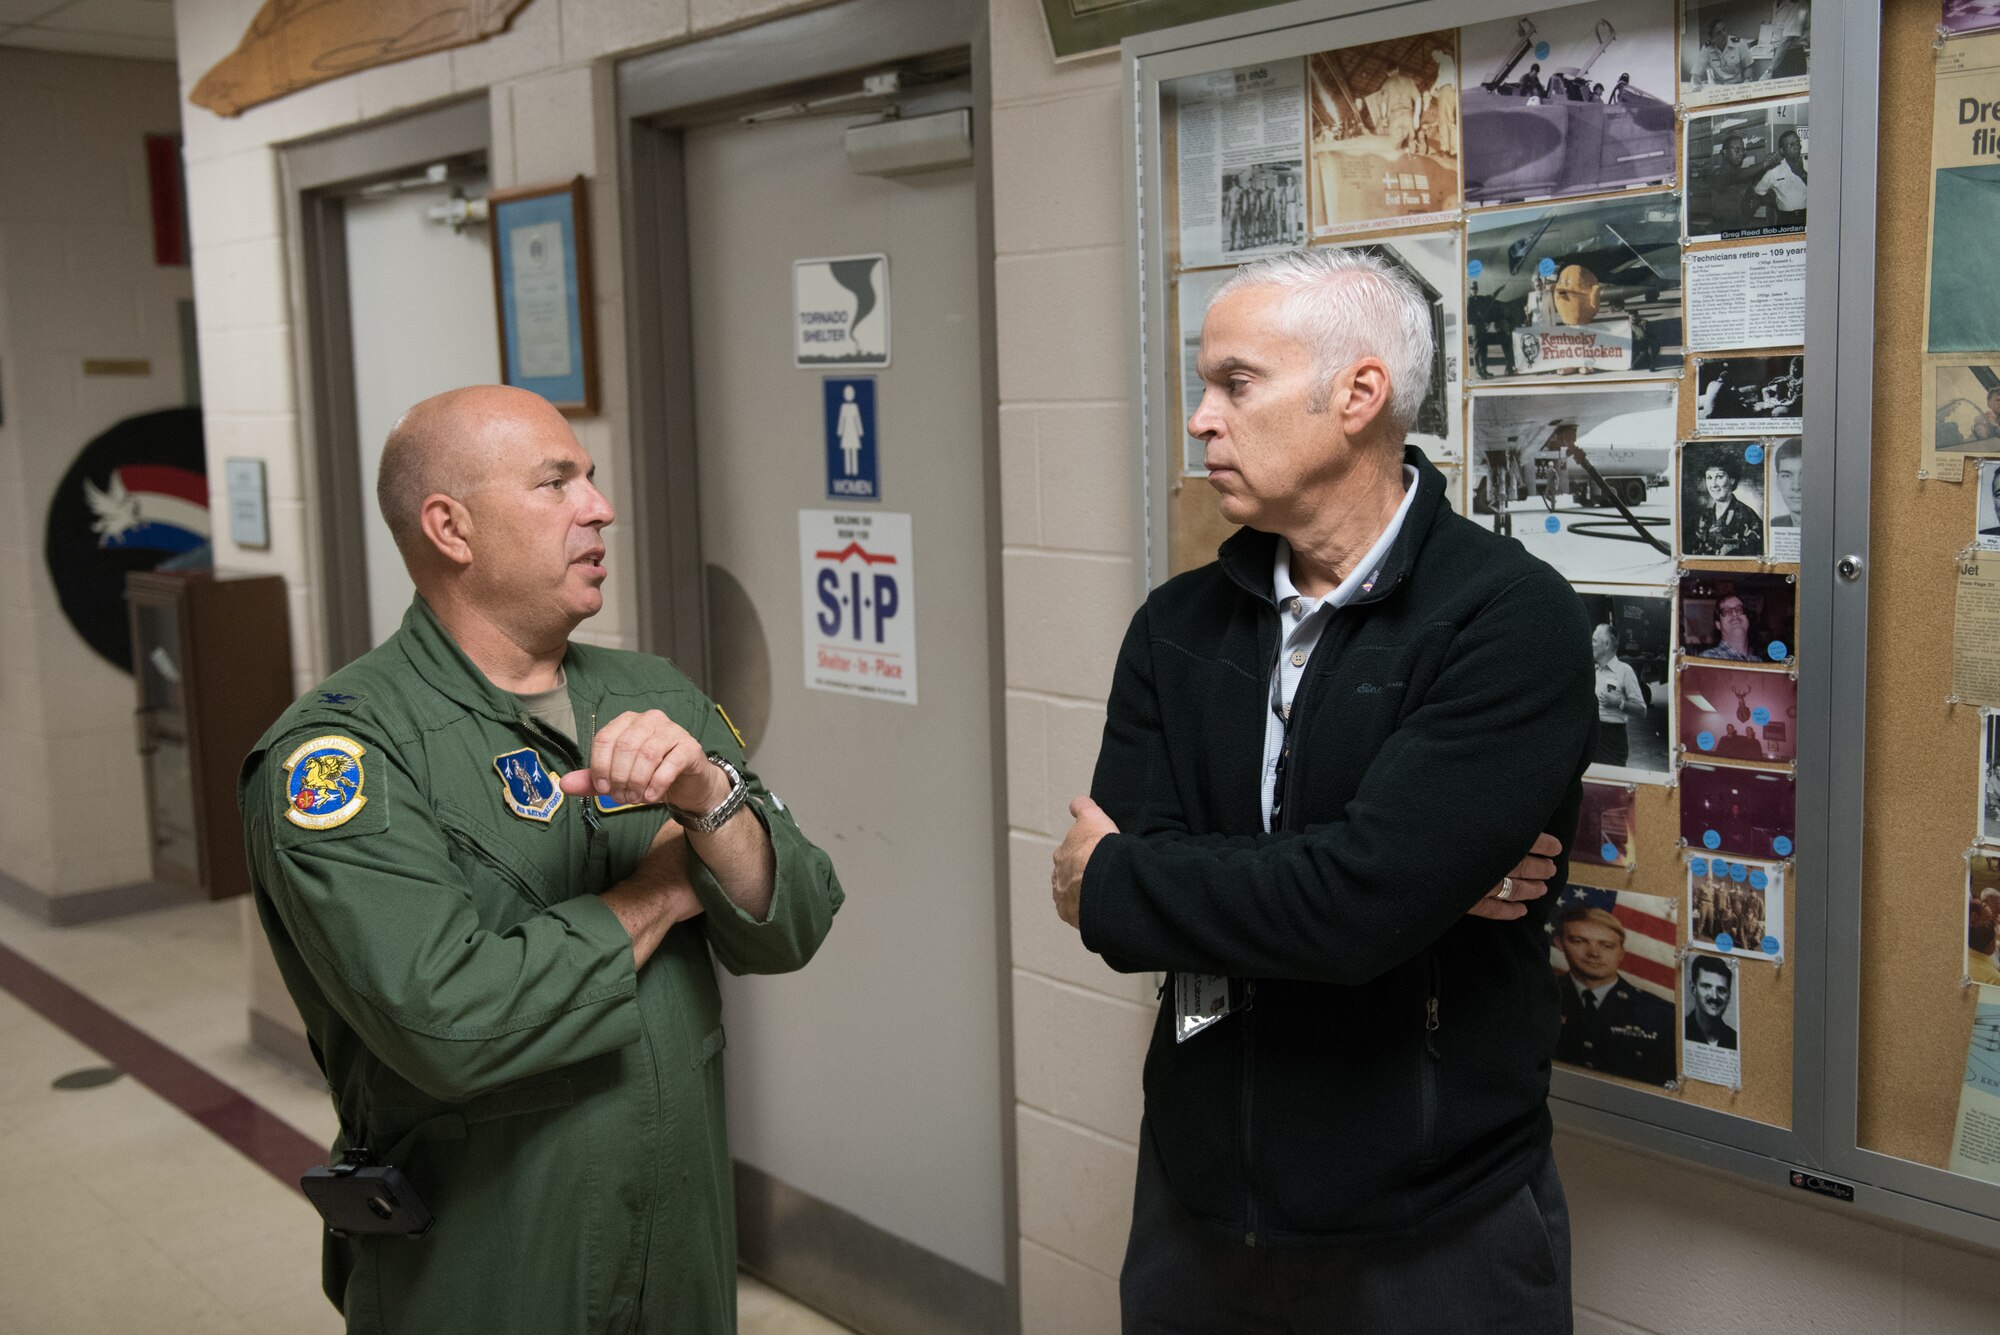 Col. Ken Dale, commander of the 123rd Maintenance Group, talks to Gilberto Cabrera, aircraft maintenance manager for United Parcel Service, during a tour of the Kentucky Air National Guard Base in Louisville, Ky., Oct. 26, 2016, as part of an Employer Support of the Guard and Reserve “Bosslift.” The event was designed to enhance civilian employers’ understanding of the unit’s mission and the work their employees do when serving as reservists in the Kentucky Air Guard. (U.S. Air National Guard photo by Master Sgt. Phil Speck)